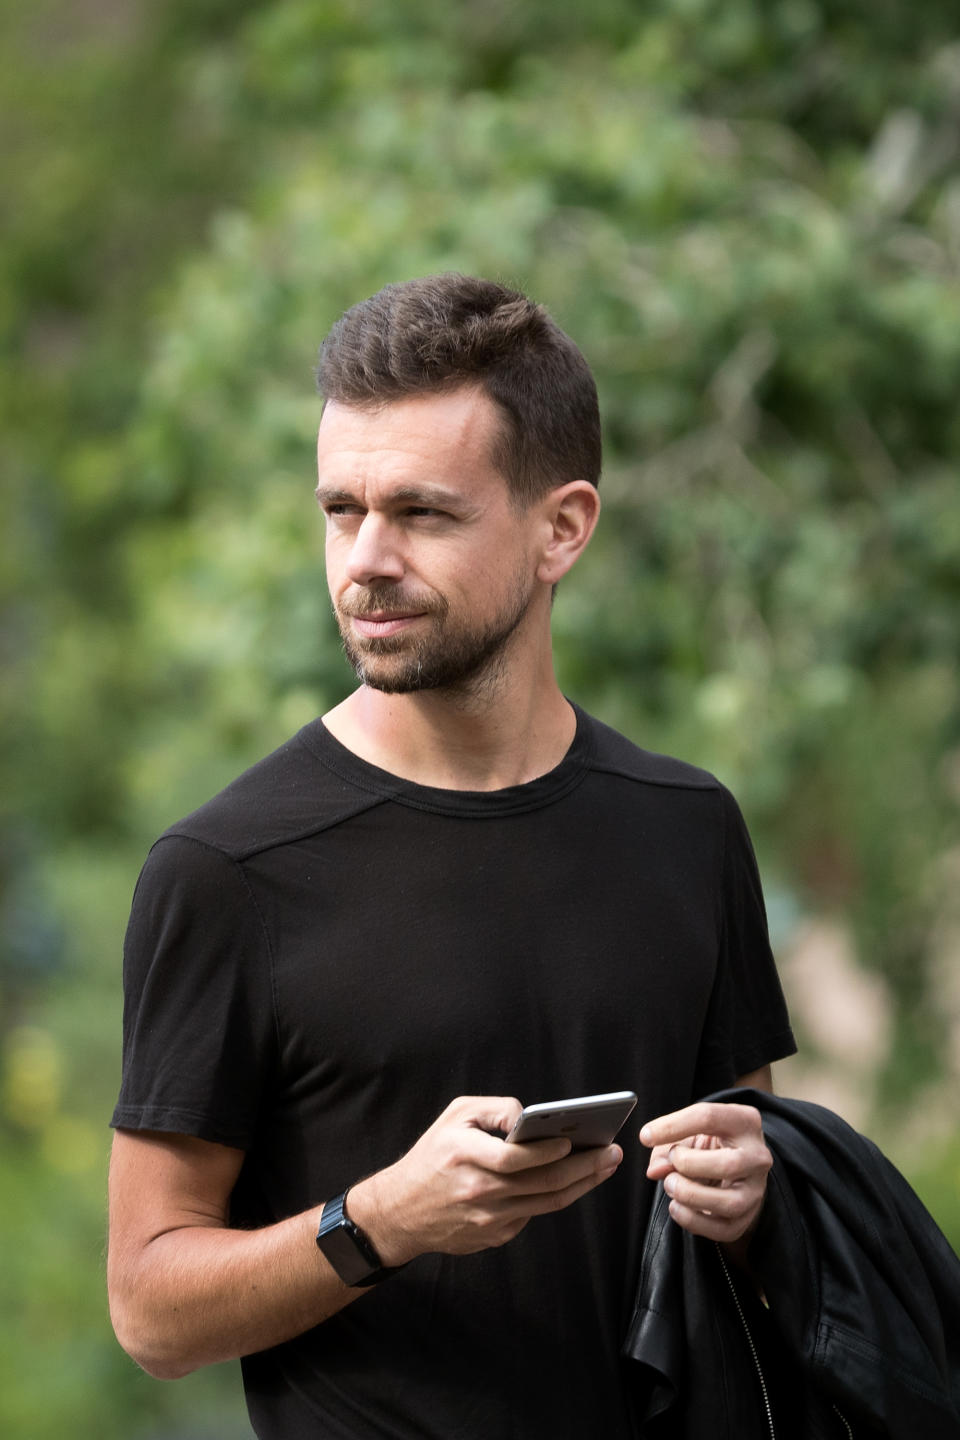 Jack Dorsey in 2016. (Photo: Drew Angerer/Getty Images)